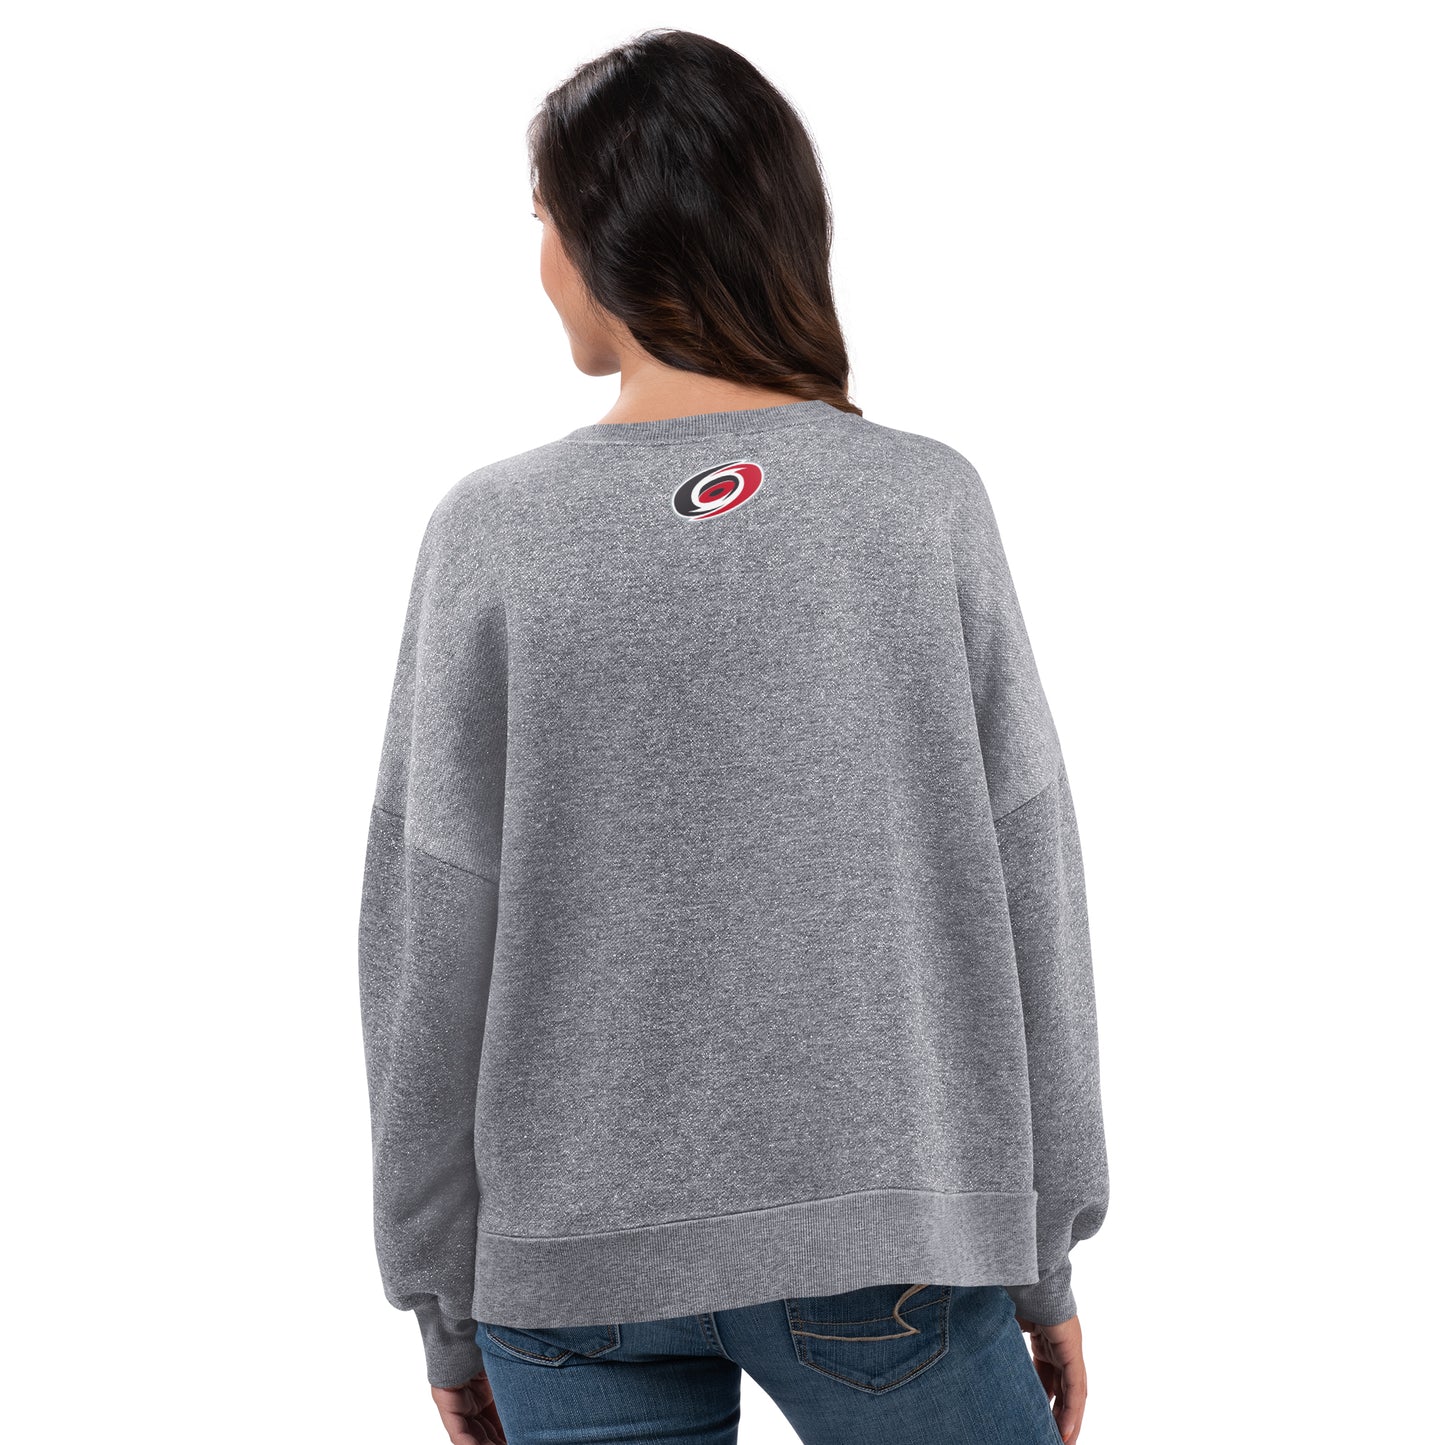 Back: Grey crewneck with Hurricanes logo at top of neck